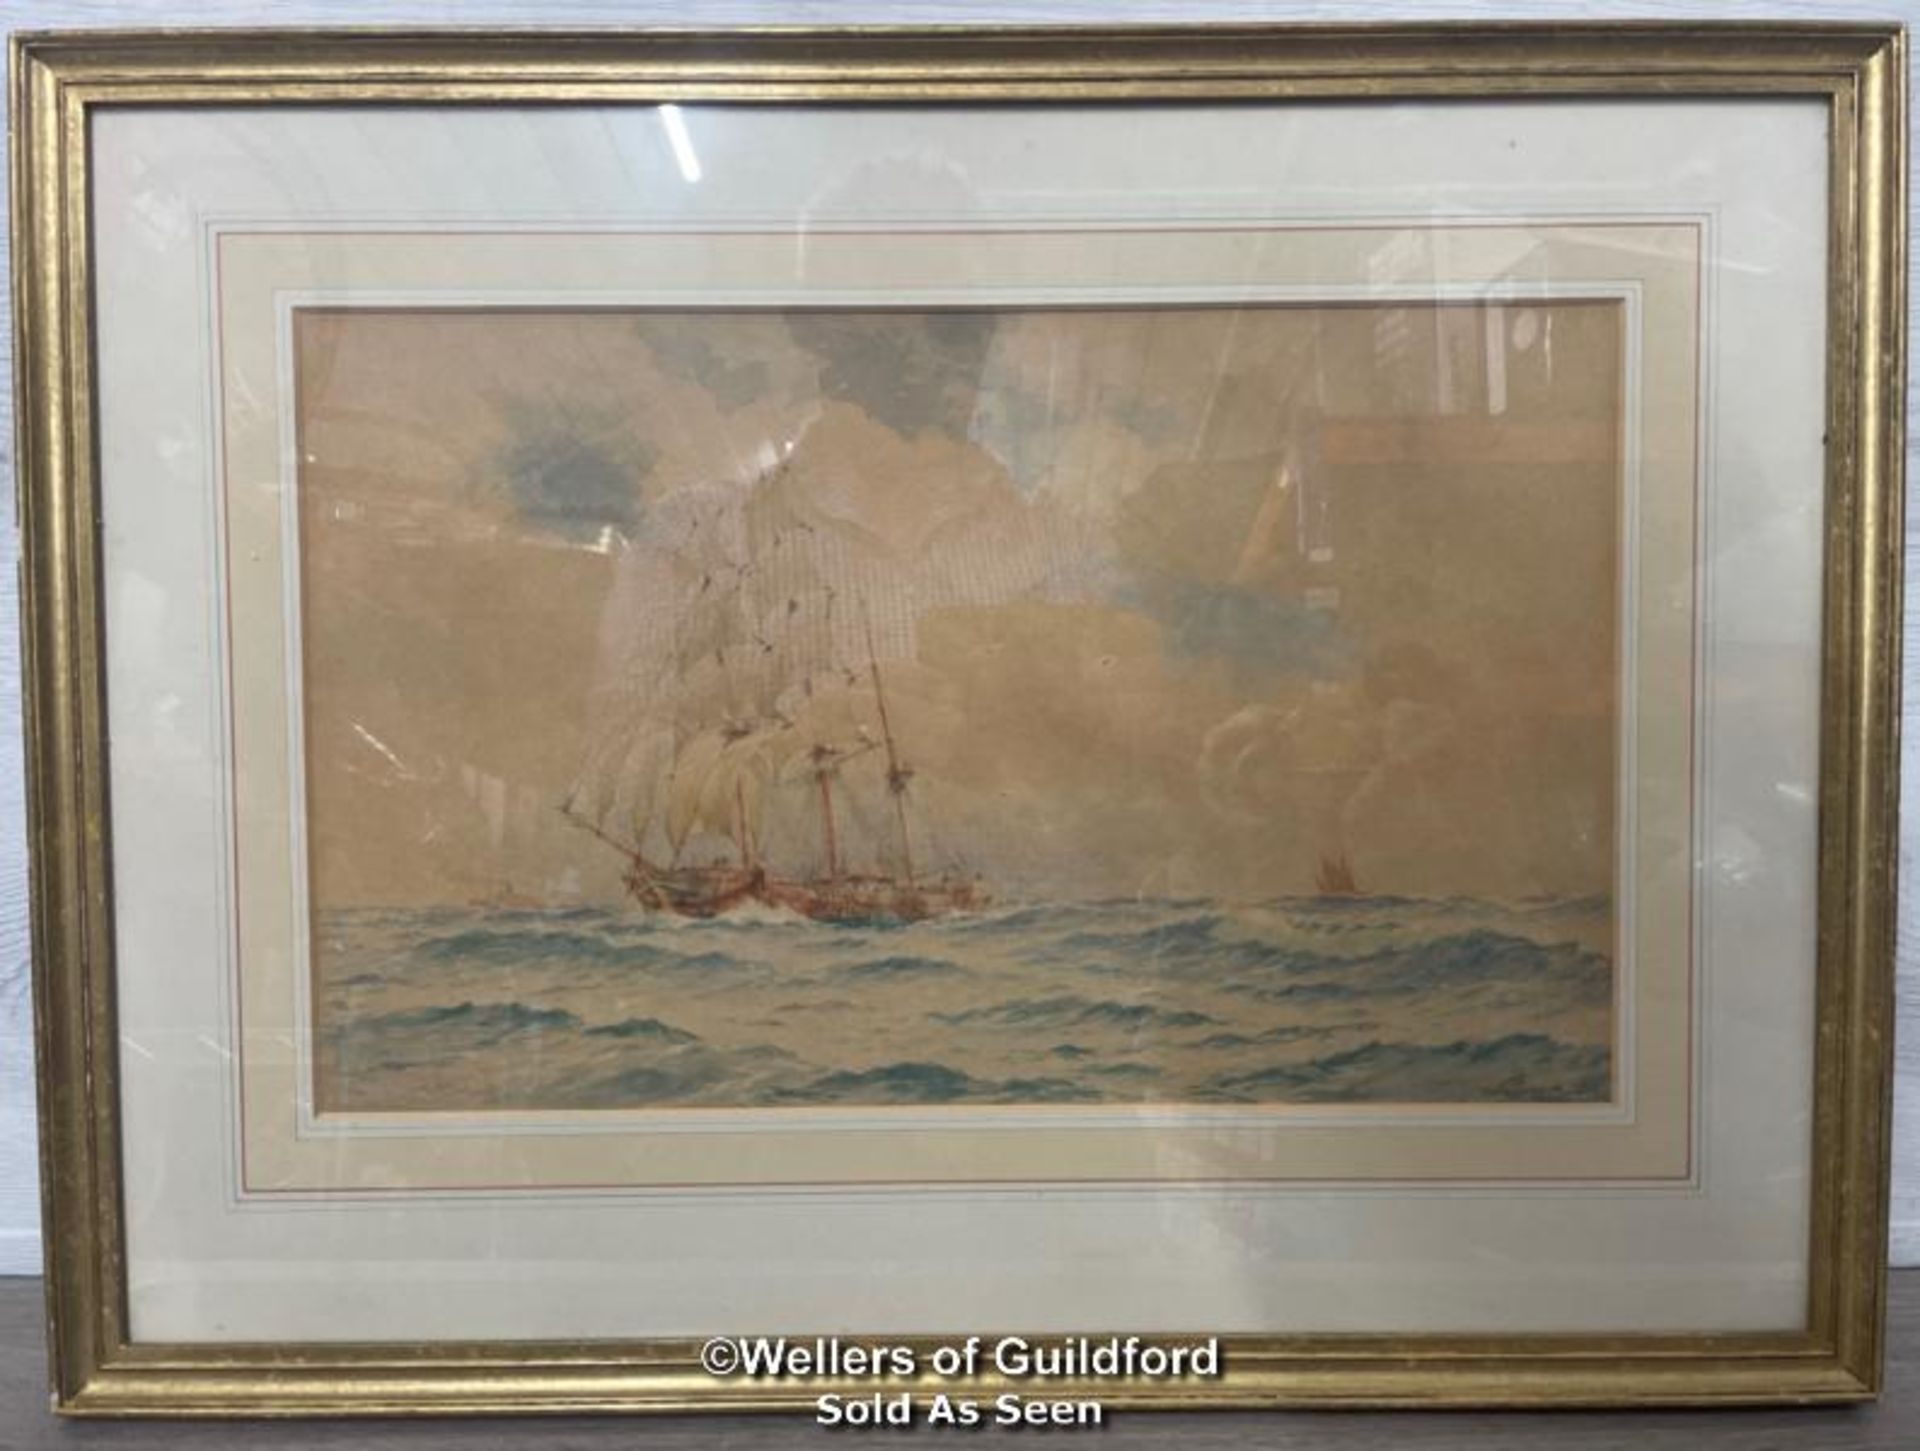 WILLIAM STEPHEN TOMKIN (1861-1940) FRAMED WATERCOLOUR OF A TALL SHIP IN ROUGH SEA, SIGNED AND